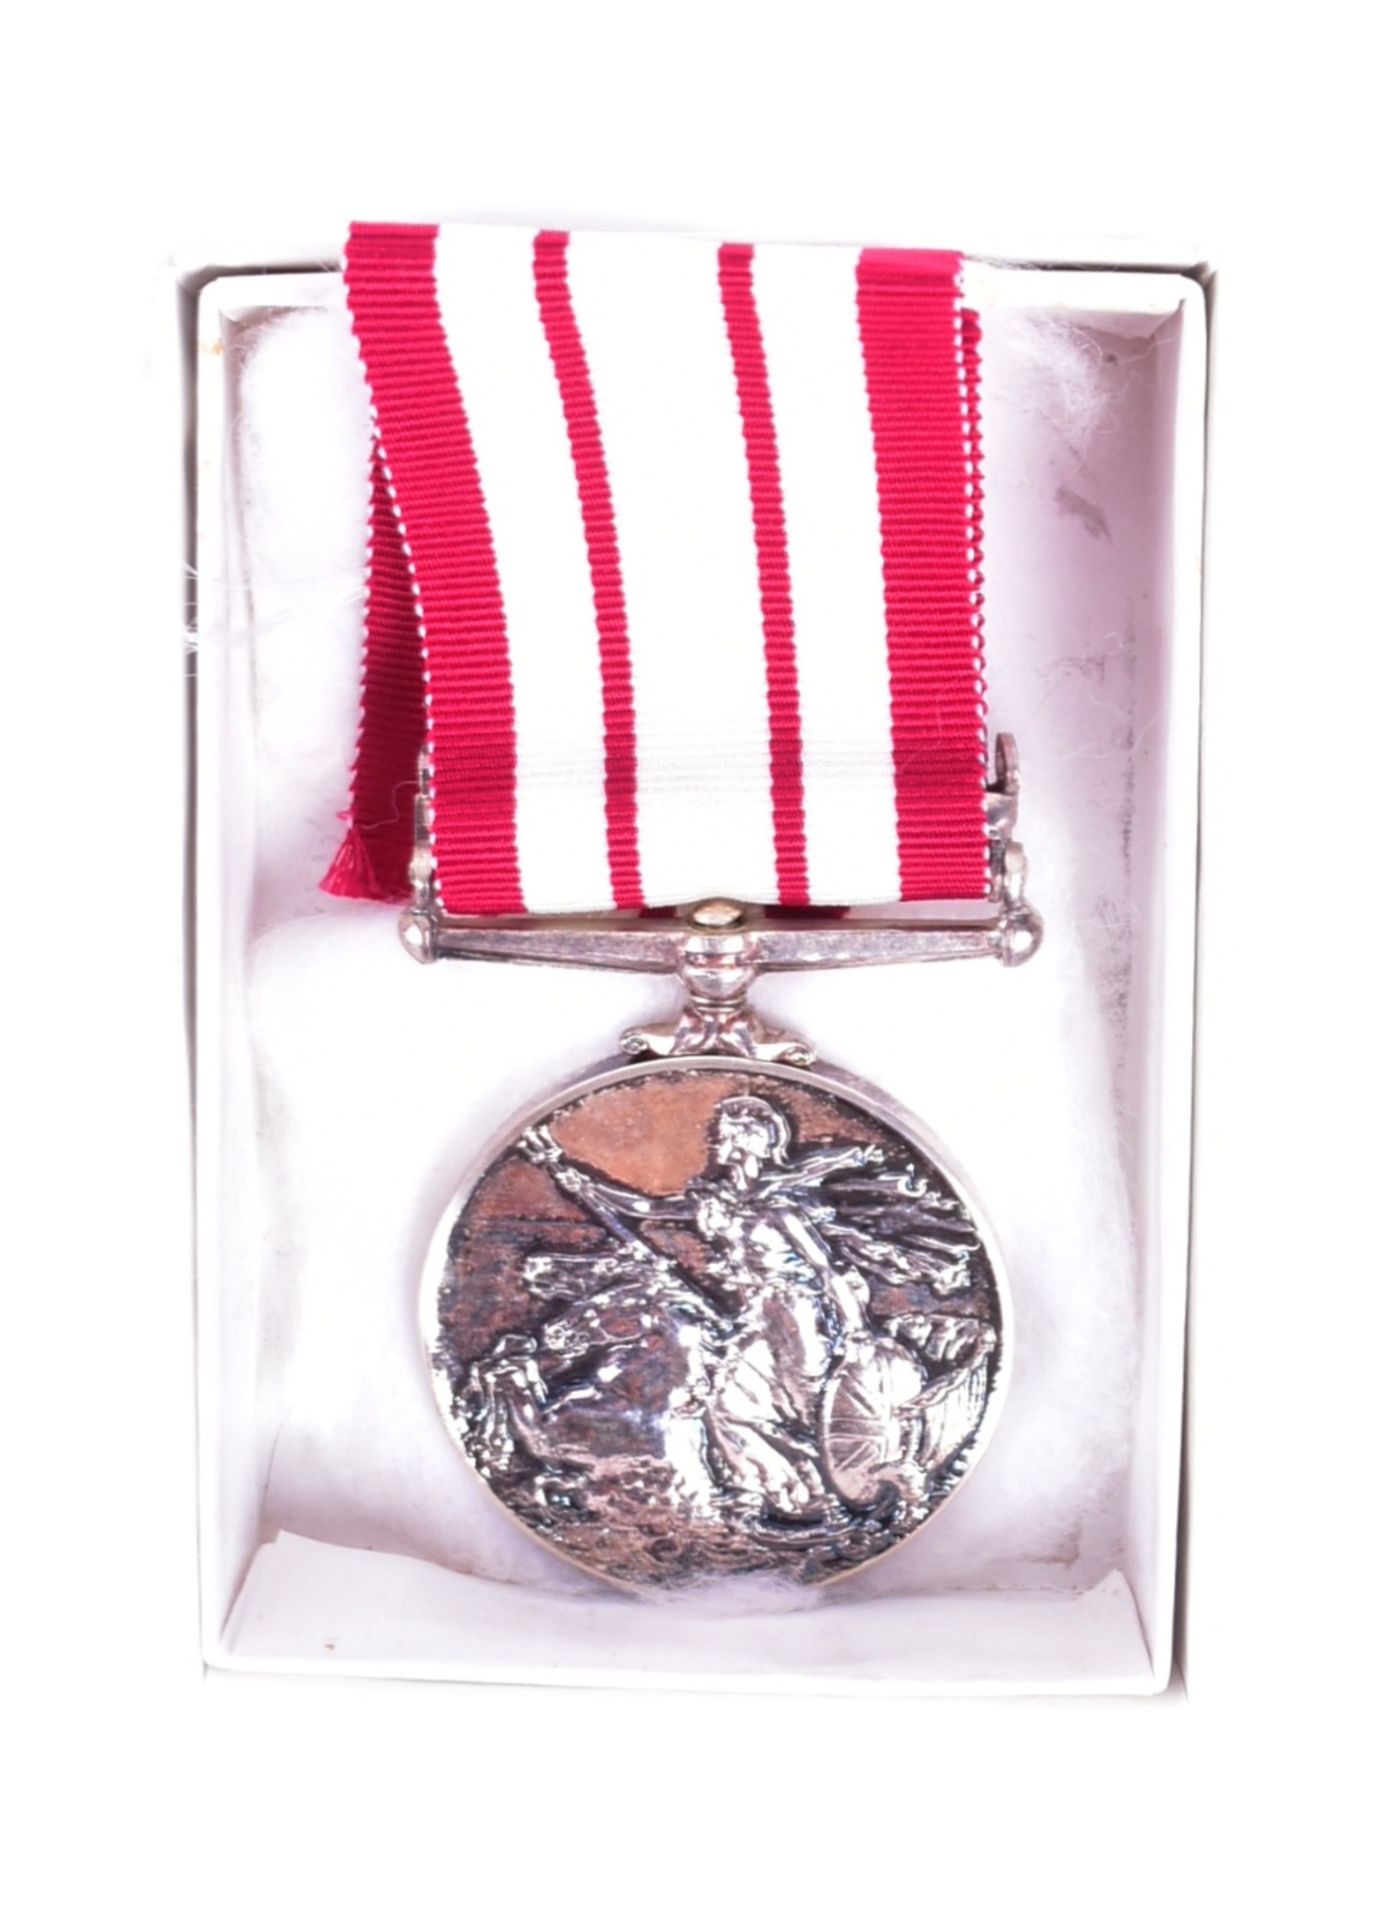 ROYAL MARINES GENERAL SERVICE MEDAL - CANAL ZONE